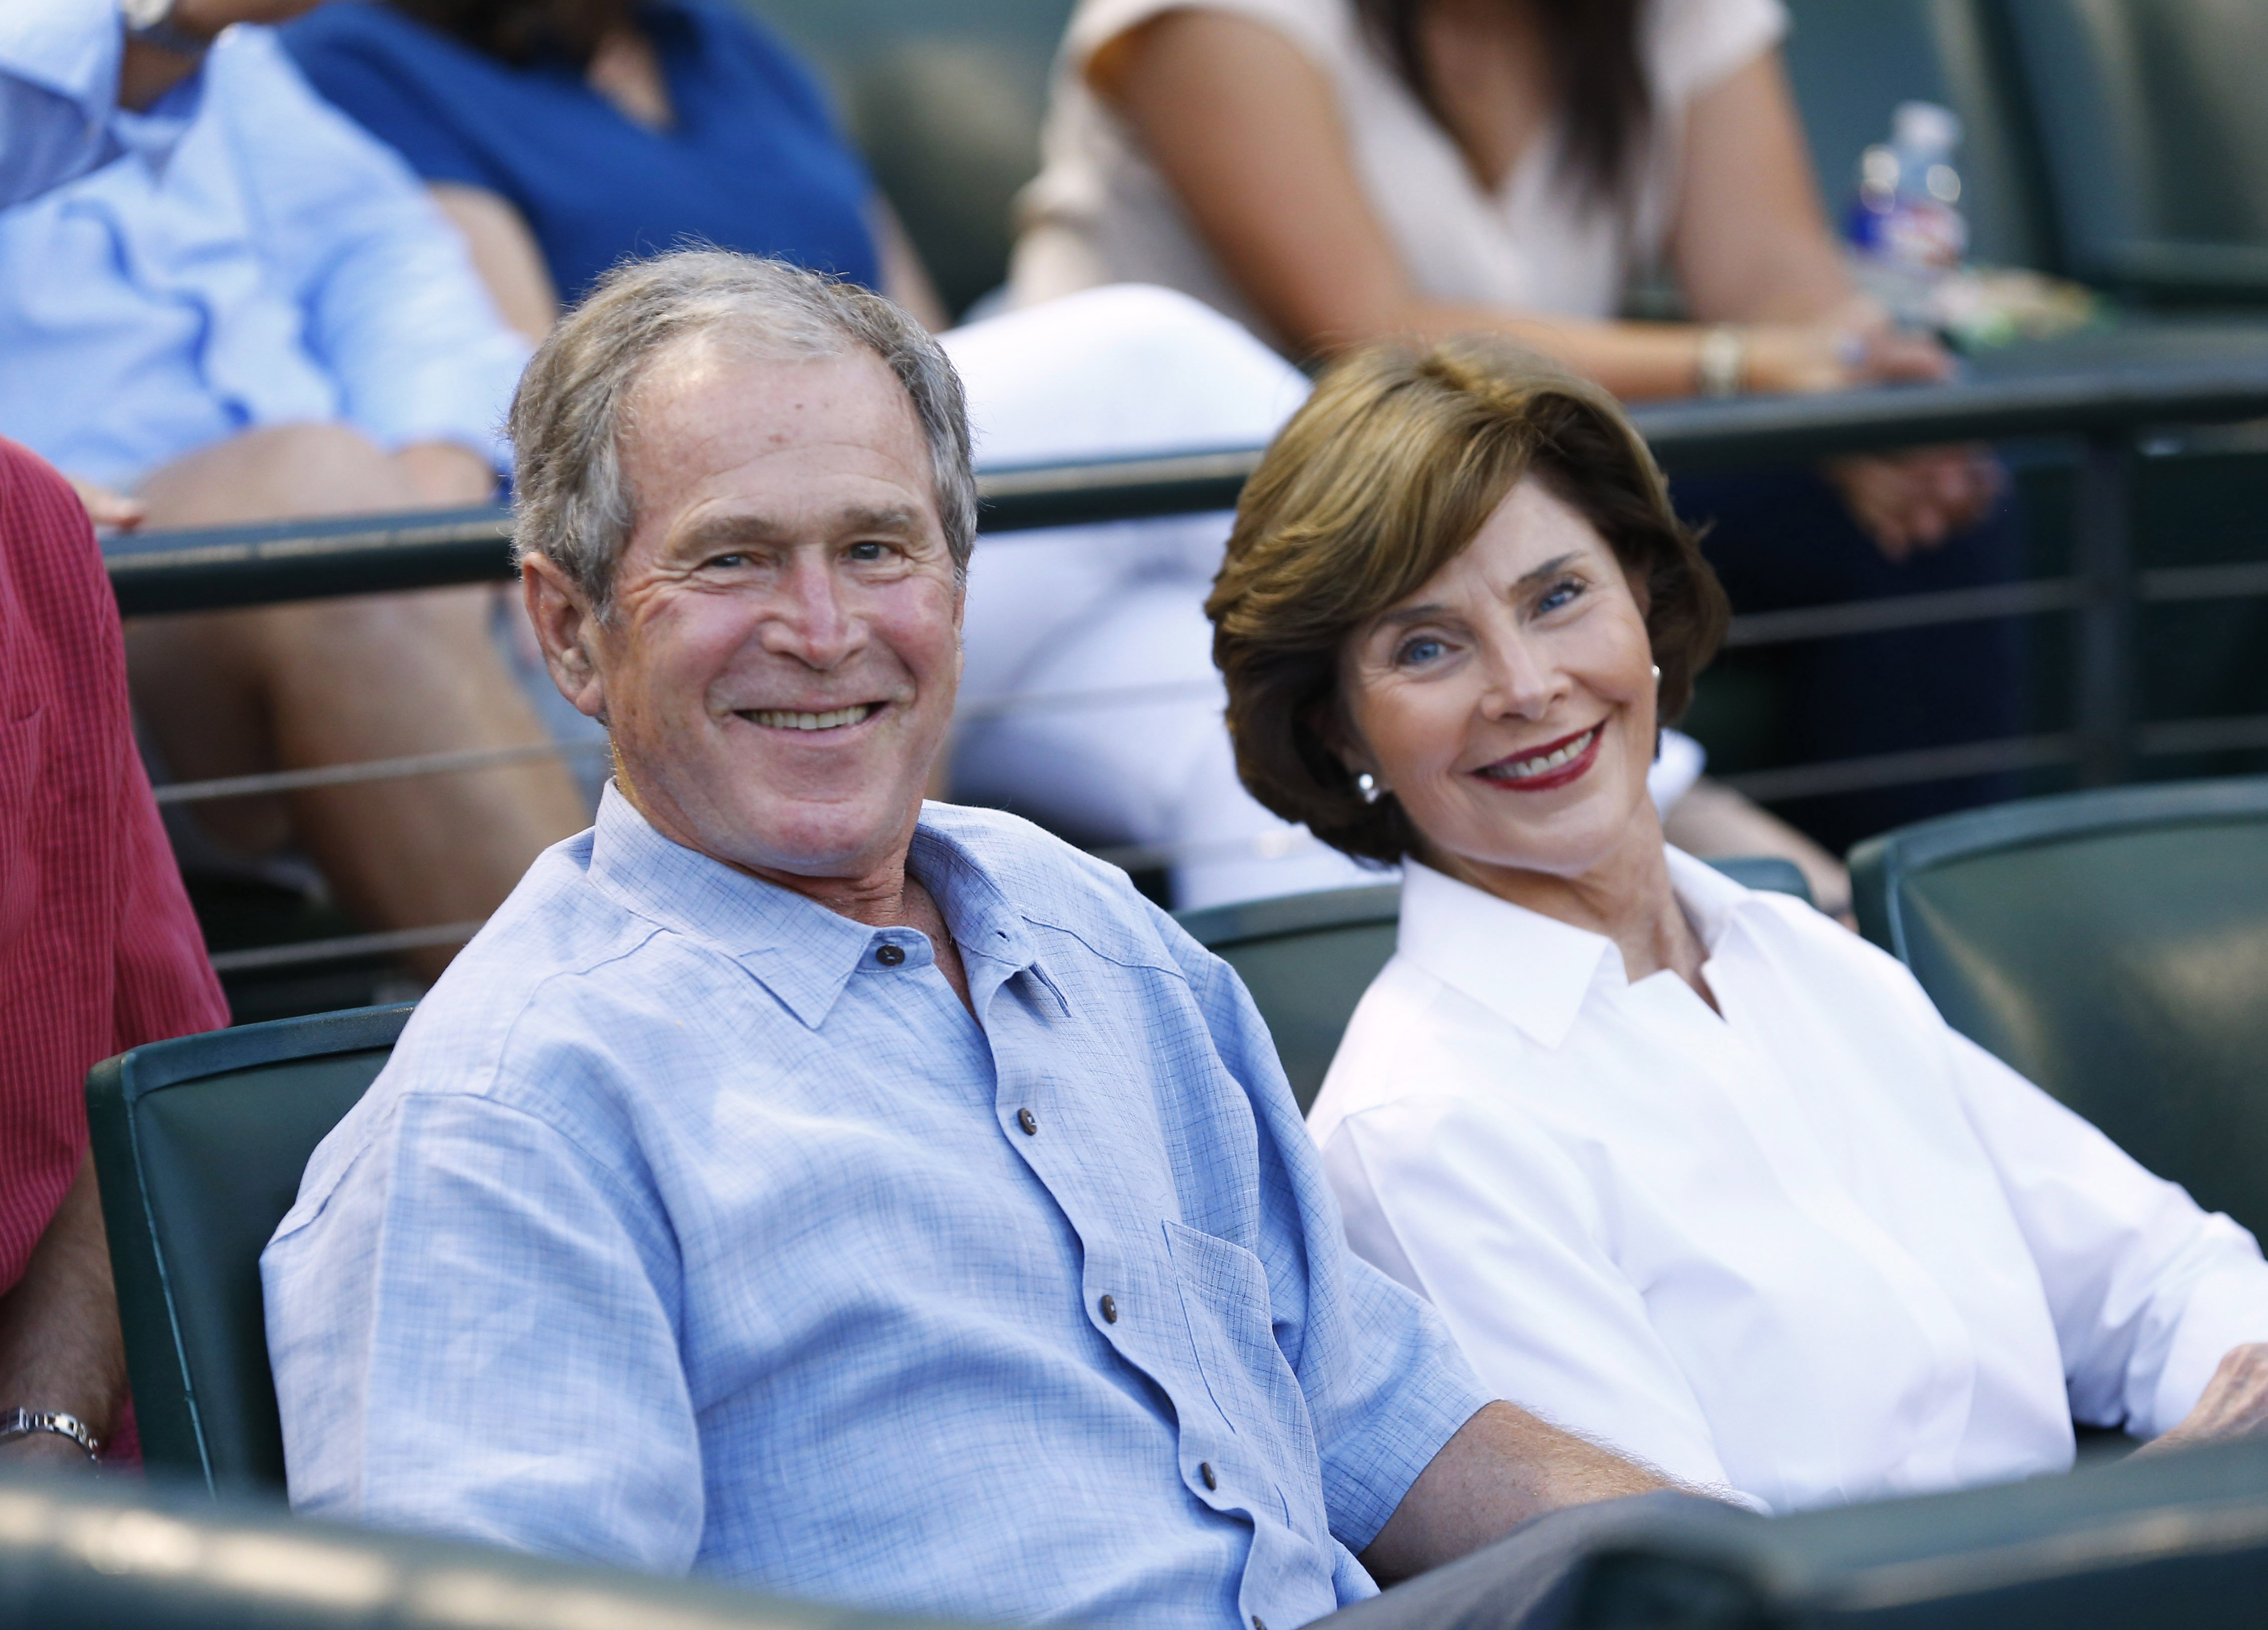 Former U.S. president George W. Bush and former First Lady Laura Busy wait for the start of the game between the Seattle Mariners and the Texas Rangers at Globe Life Park in Arlington on September 19, 2015 in Arlington, Texas | Source: Getty Images 